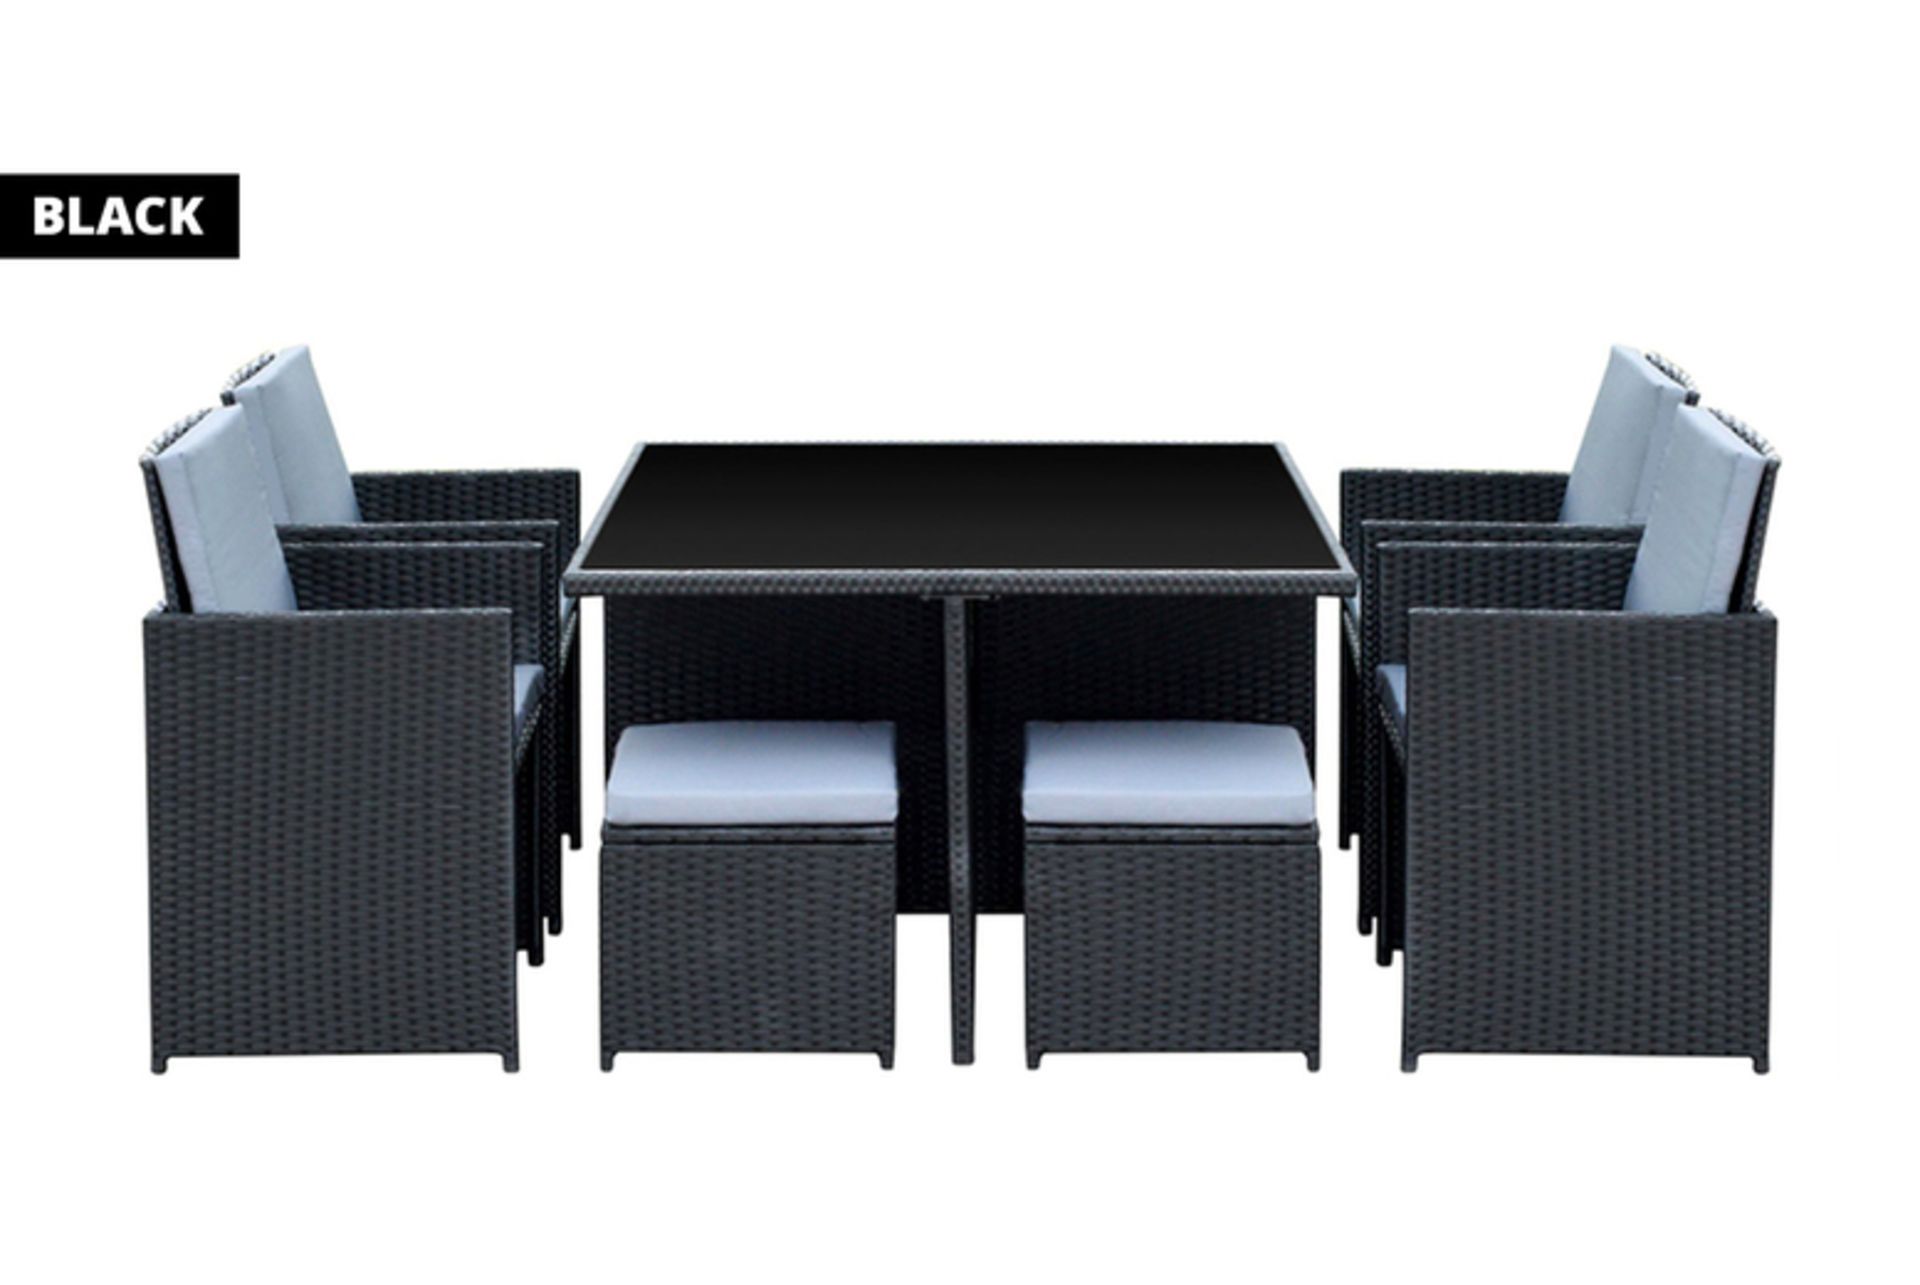 Free Delivery - Job lot of 5 x 8-Seater Monument Rattan Cube Garden Furniture Dining Set - Black - Image 3 of 4